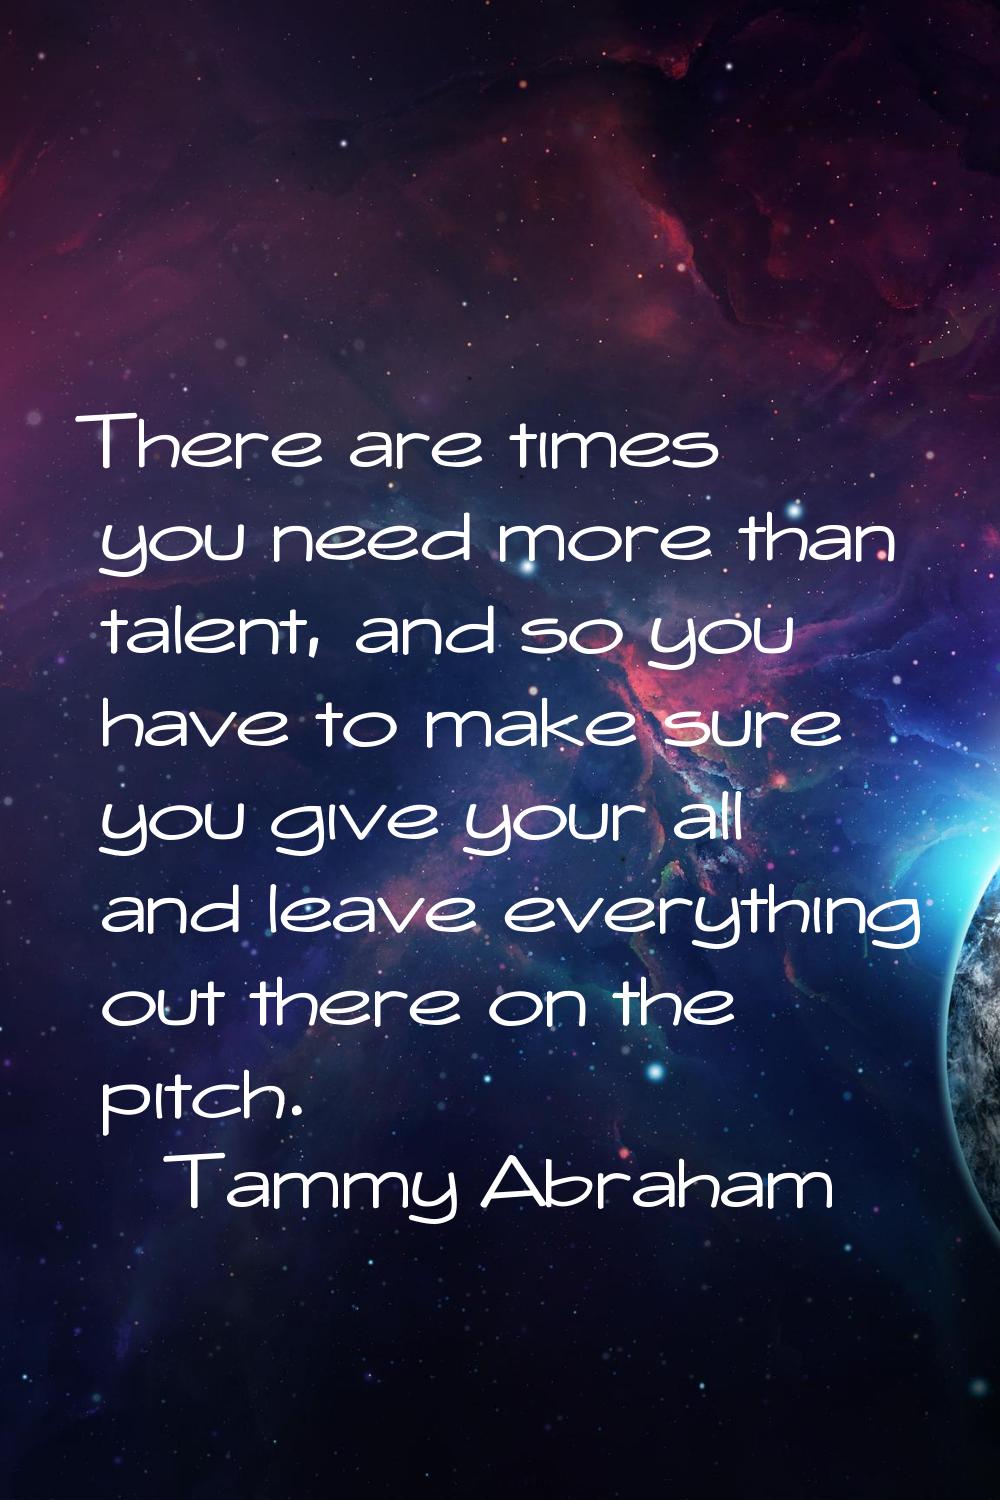 There are times you need more than talent, and so you have to make sure you give your all and leave